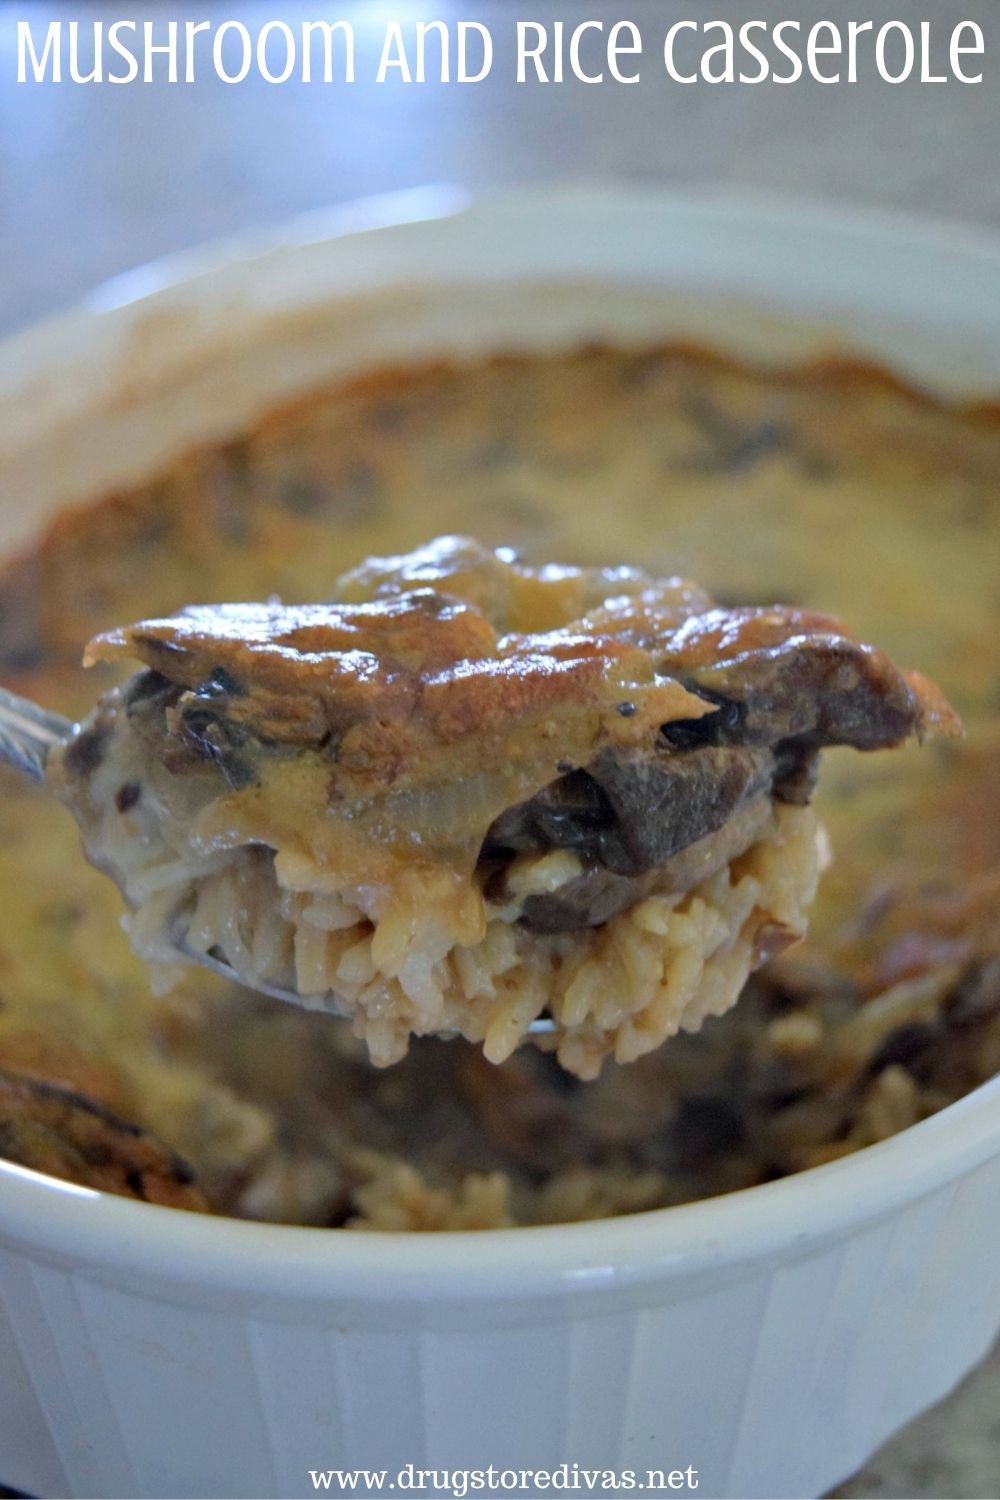 Looking for a very tasty and very easy fall dinner idea? Try this Mushroom and Rice Casserole from www.drugstoredivas.net.